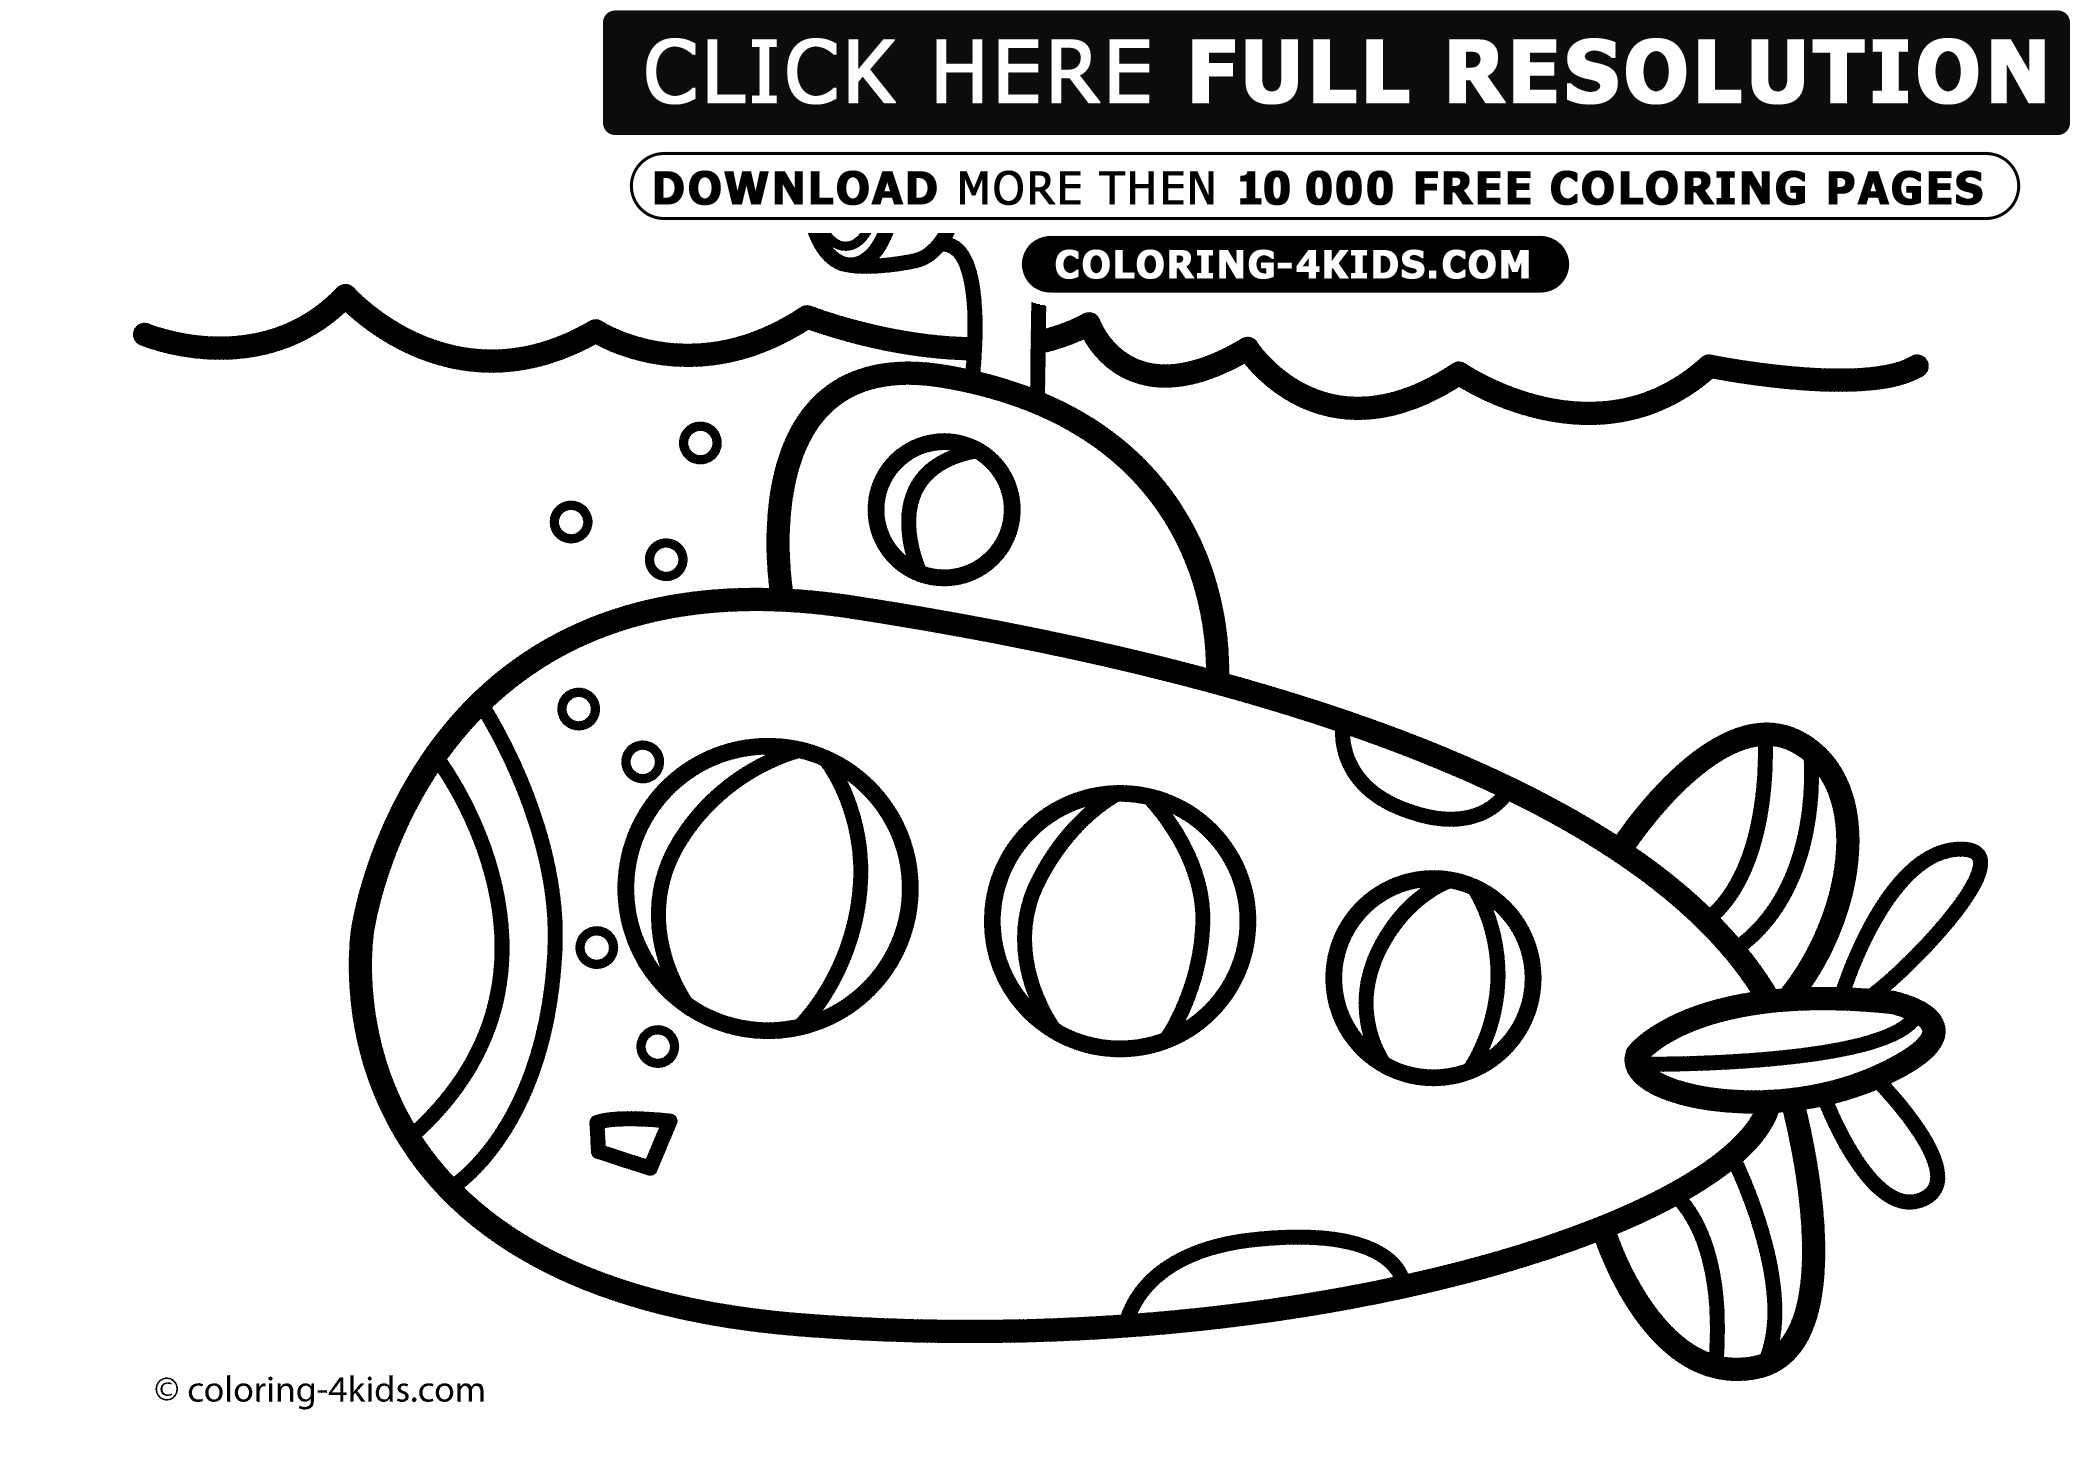 Submarine Coloring pages | kids coloring pages | Coloring pages for kids | #7